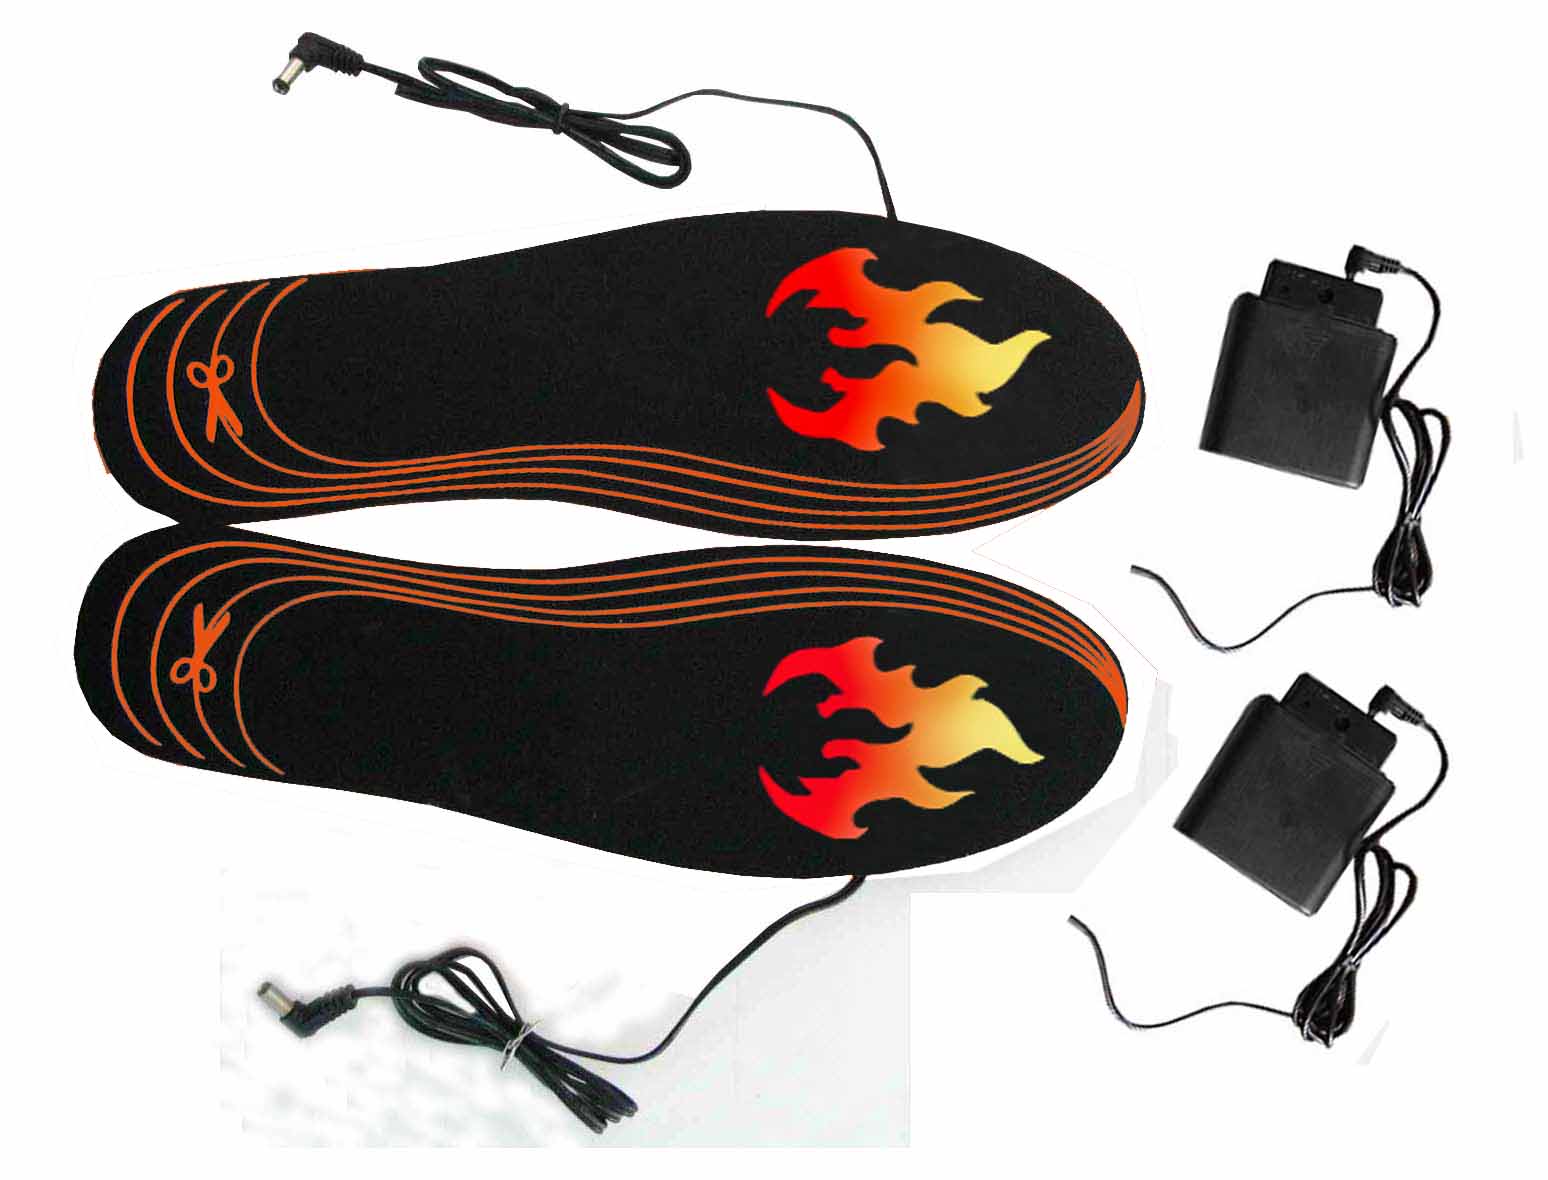  Rechargeable Battery Heating Shoe Insole Heated Foor Warmer ( Rechargeable Battery Heating Shoe Insole Heated Foor Warmer)